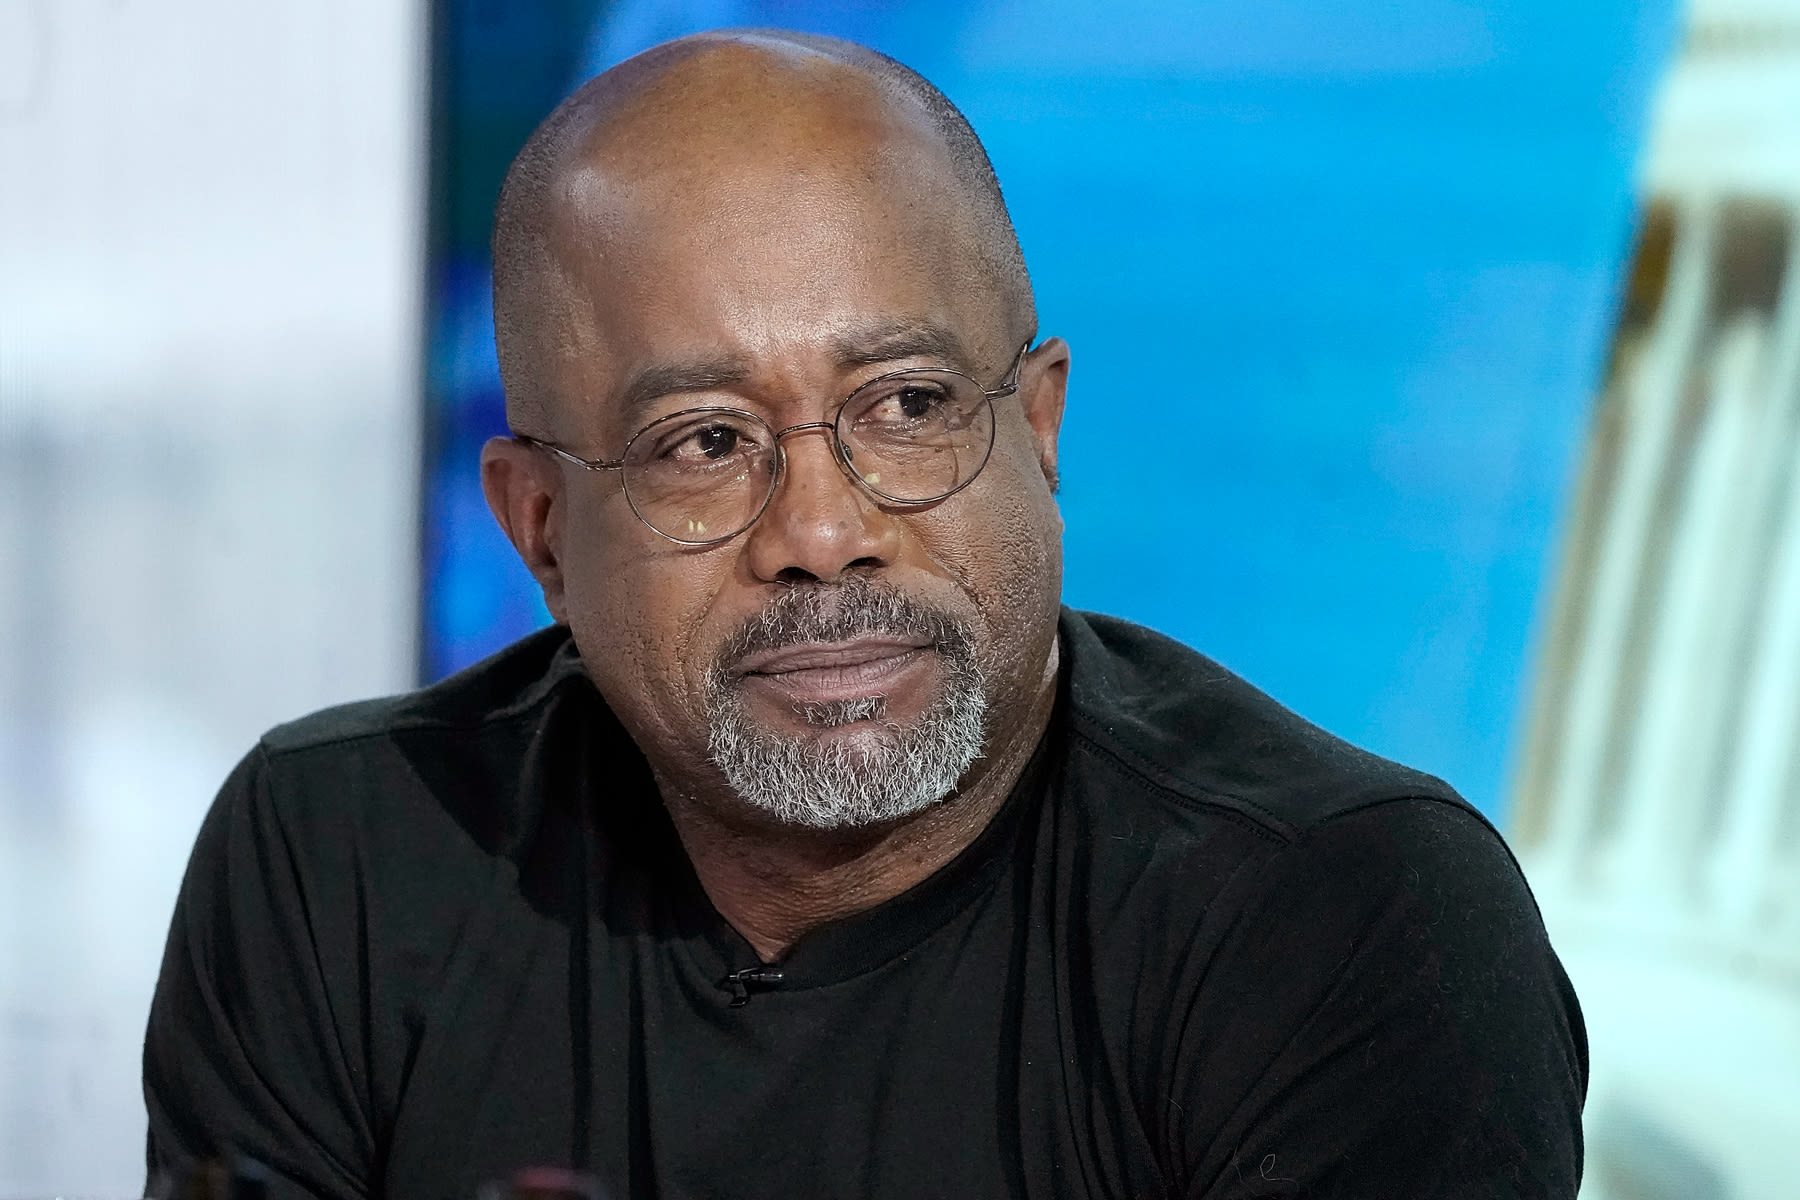 Darius Rucker Looks Back: ‘When You’re the Nice Guys, People Want to Knock You Down’